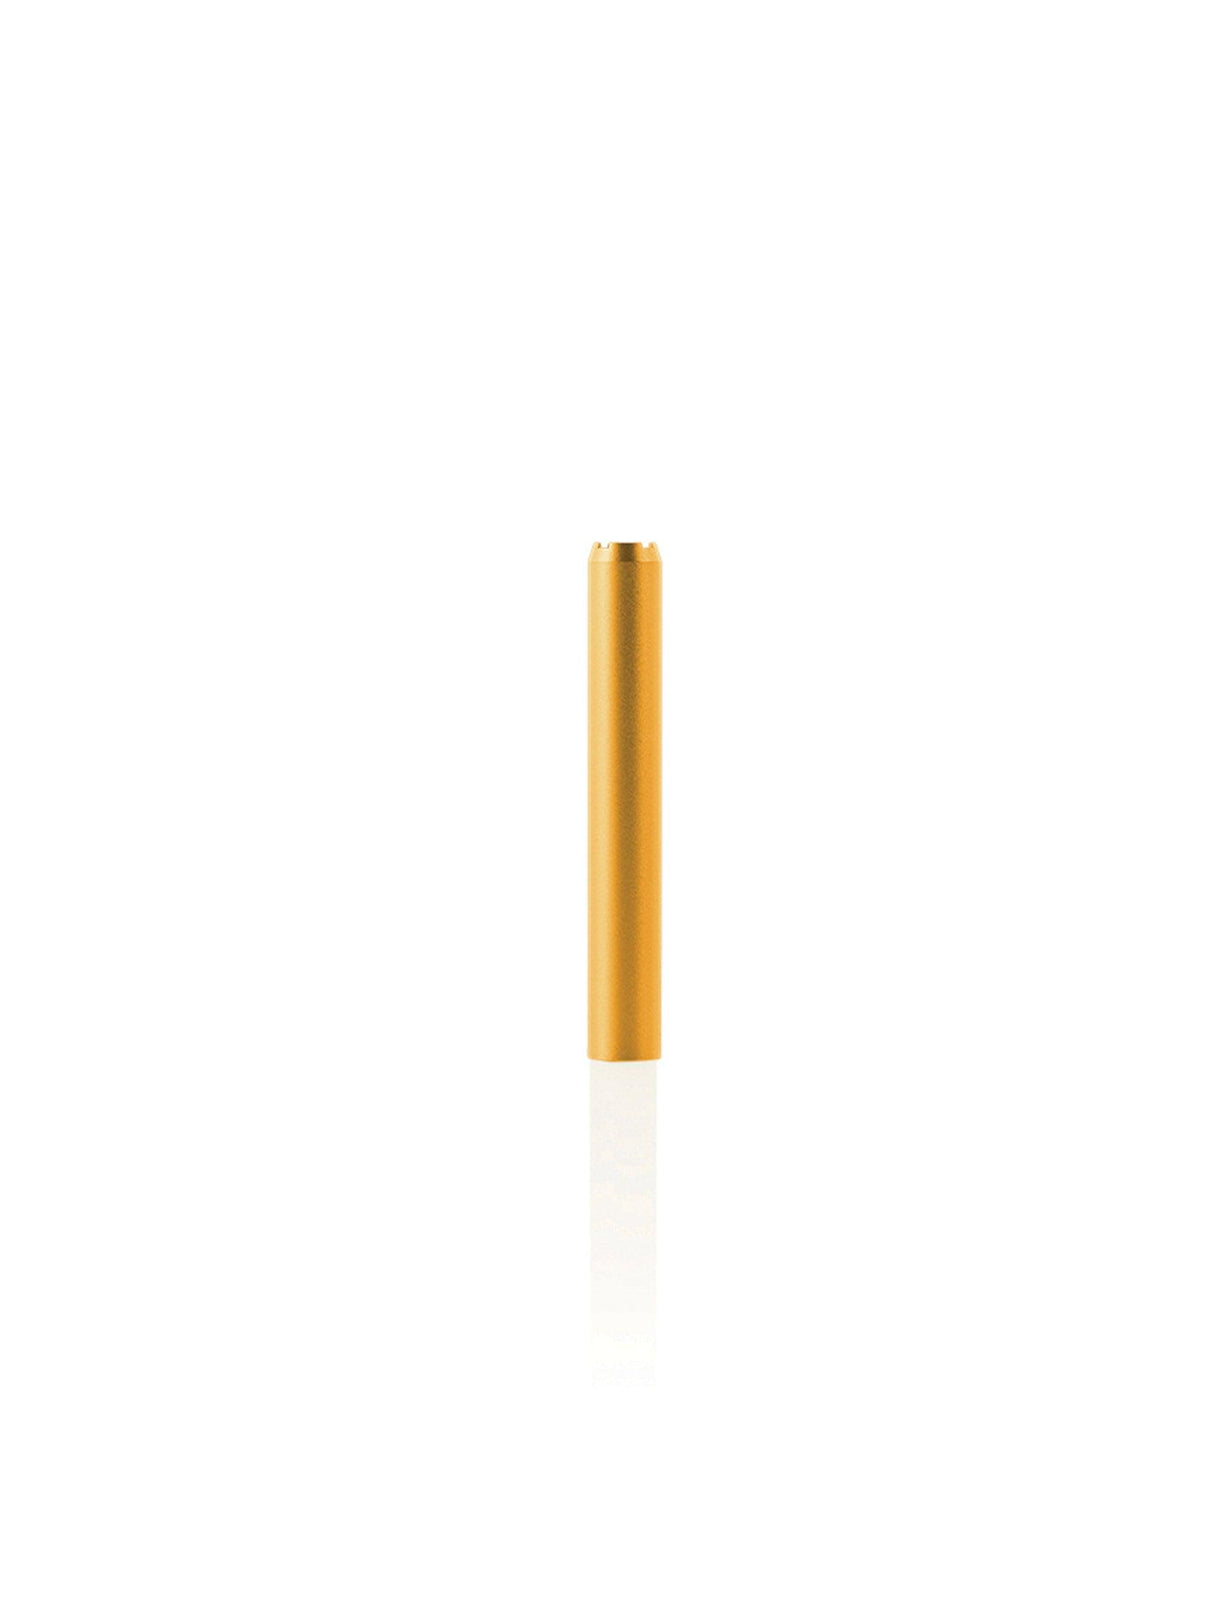 GRAV Dugout Taster in Gold - Sleek Portable Smoking Device, Front View on White Background